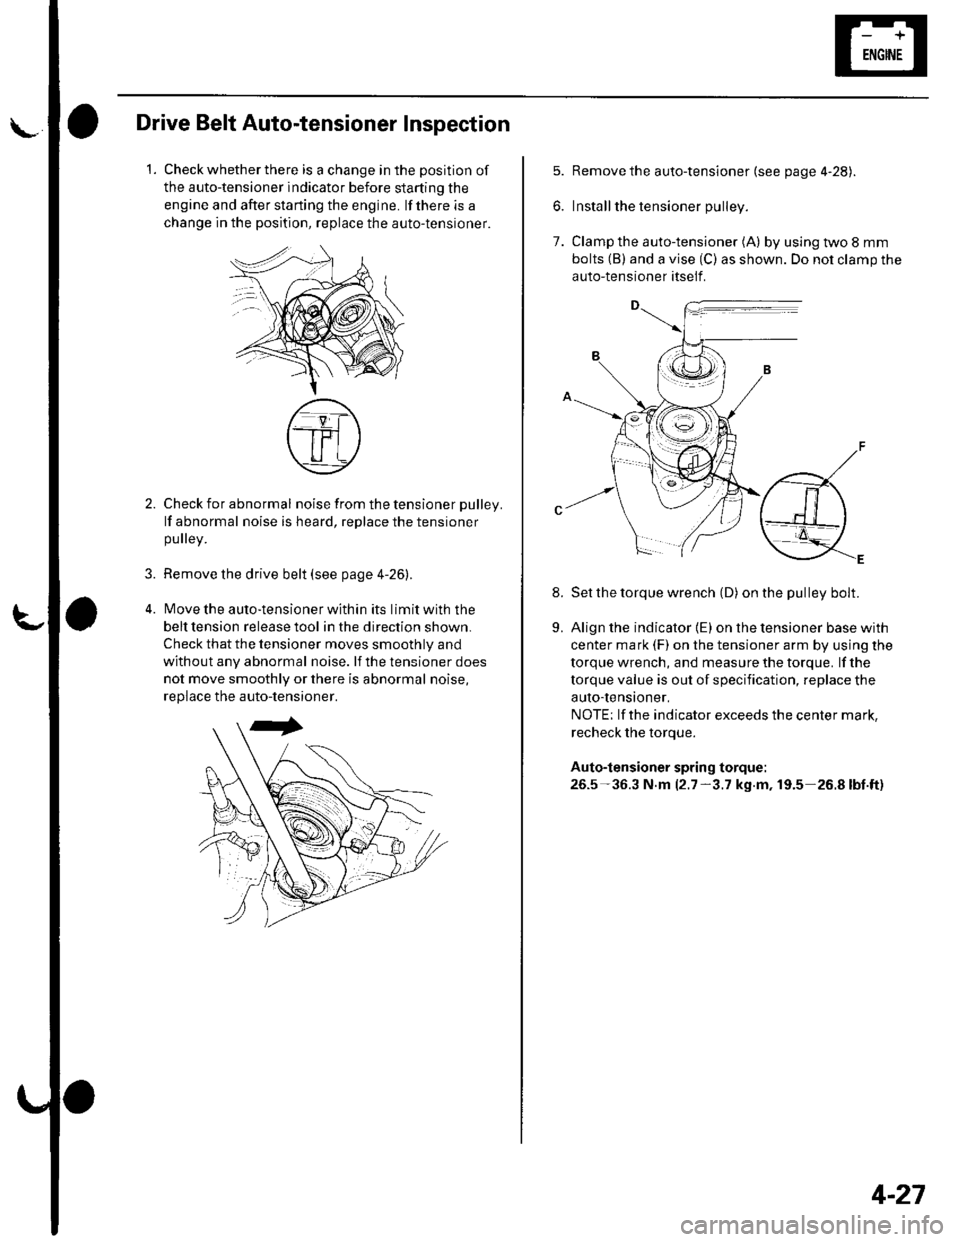 HONDA CIVIC 2003 7.G Workshop Manual \Drive Belt Auto-tensioner Inspection
1.Check whether there is a change in the position of
the auto-tensioner indicator before starting the
engine and after starting the engine. lf there is a
change i